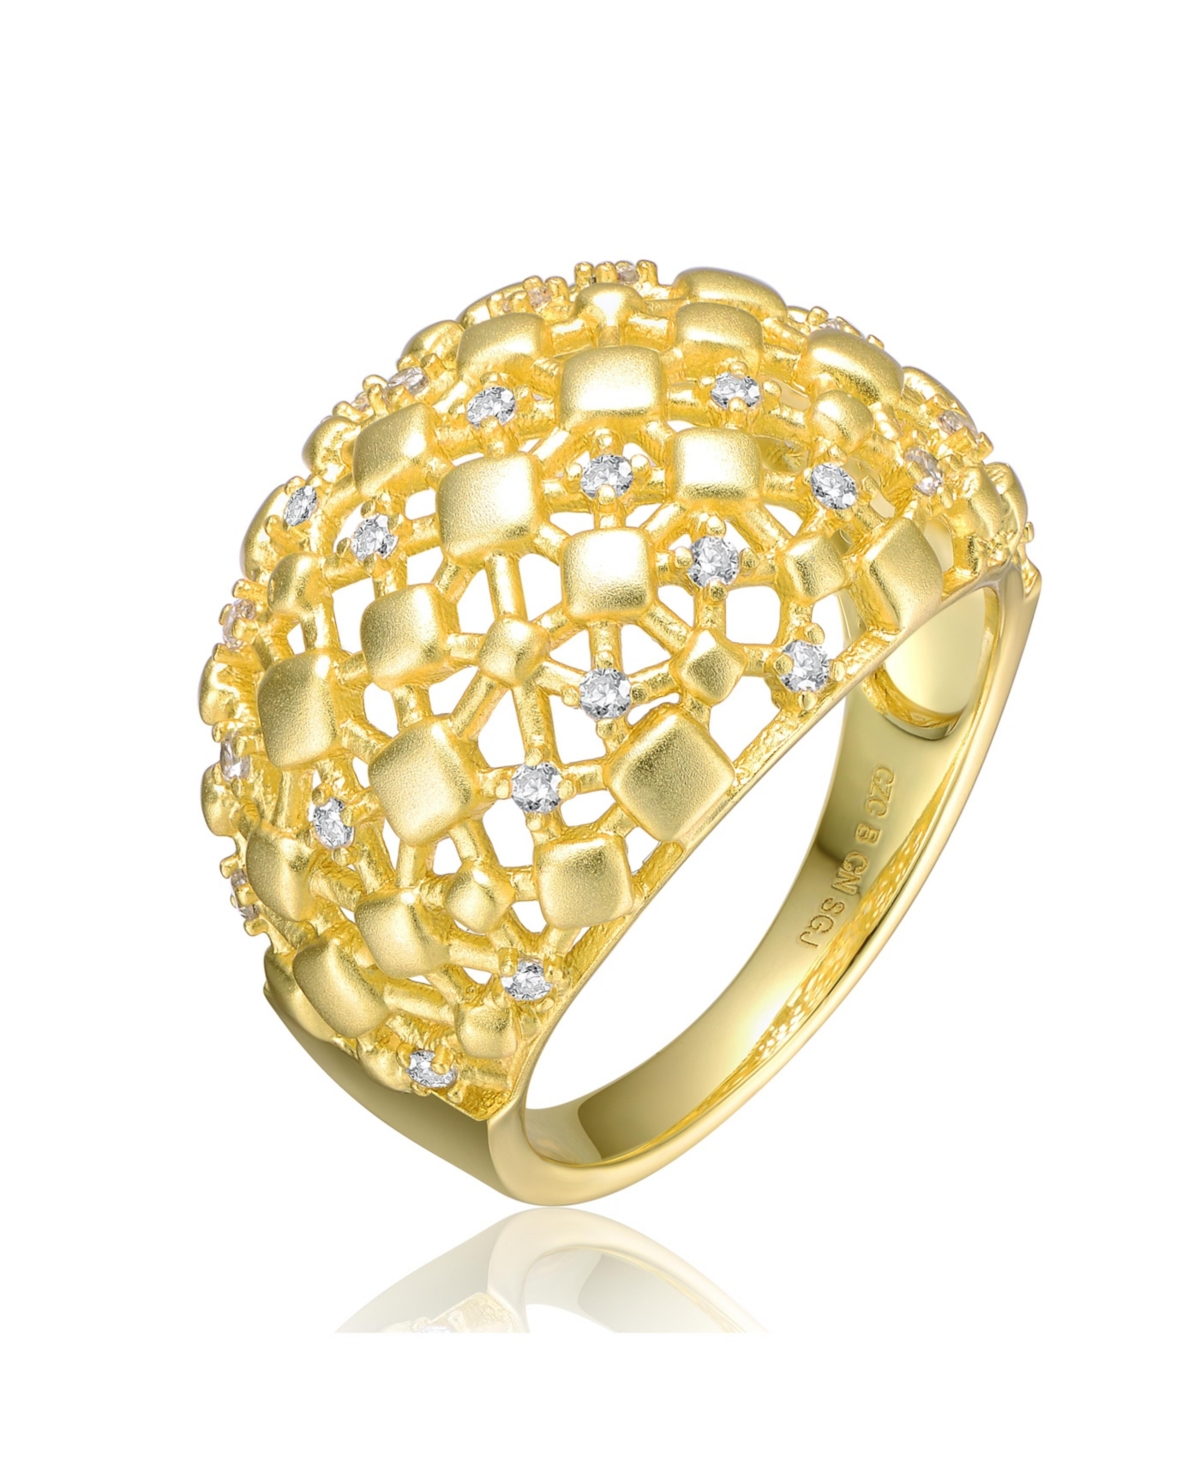 RACHEL GLAUBER RA 14K YELLOW GOLD PLATED WITH CUBIC ZIRCONIA DOME-SHAPED TEXTURED NUGGET RING